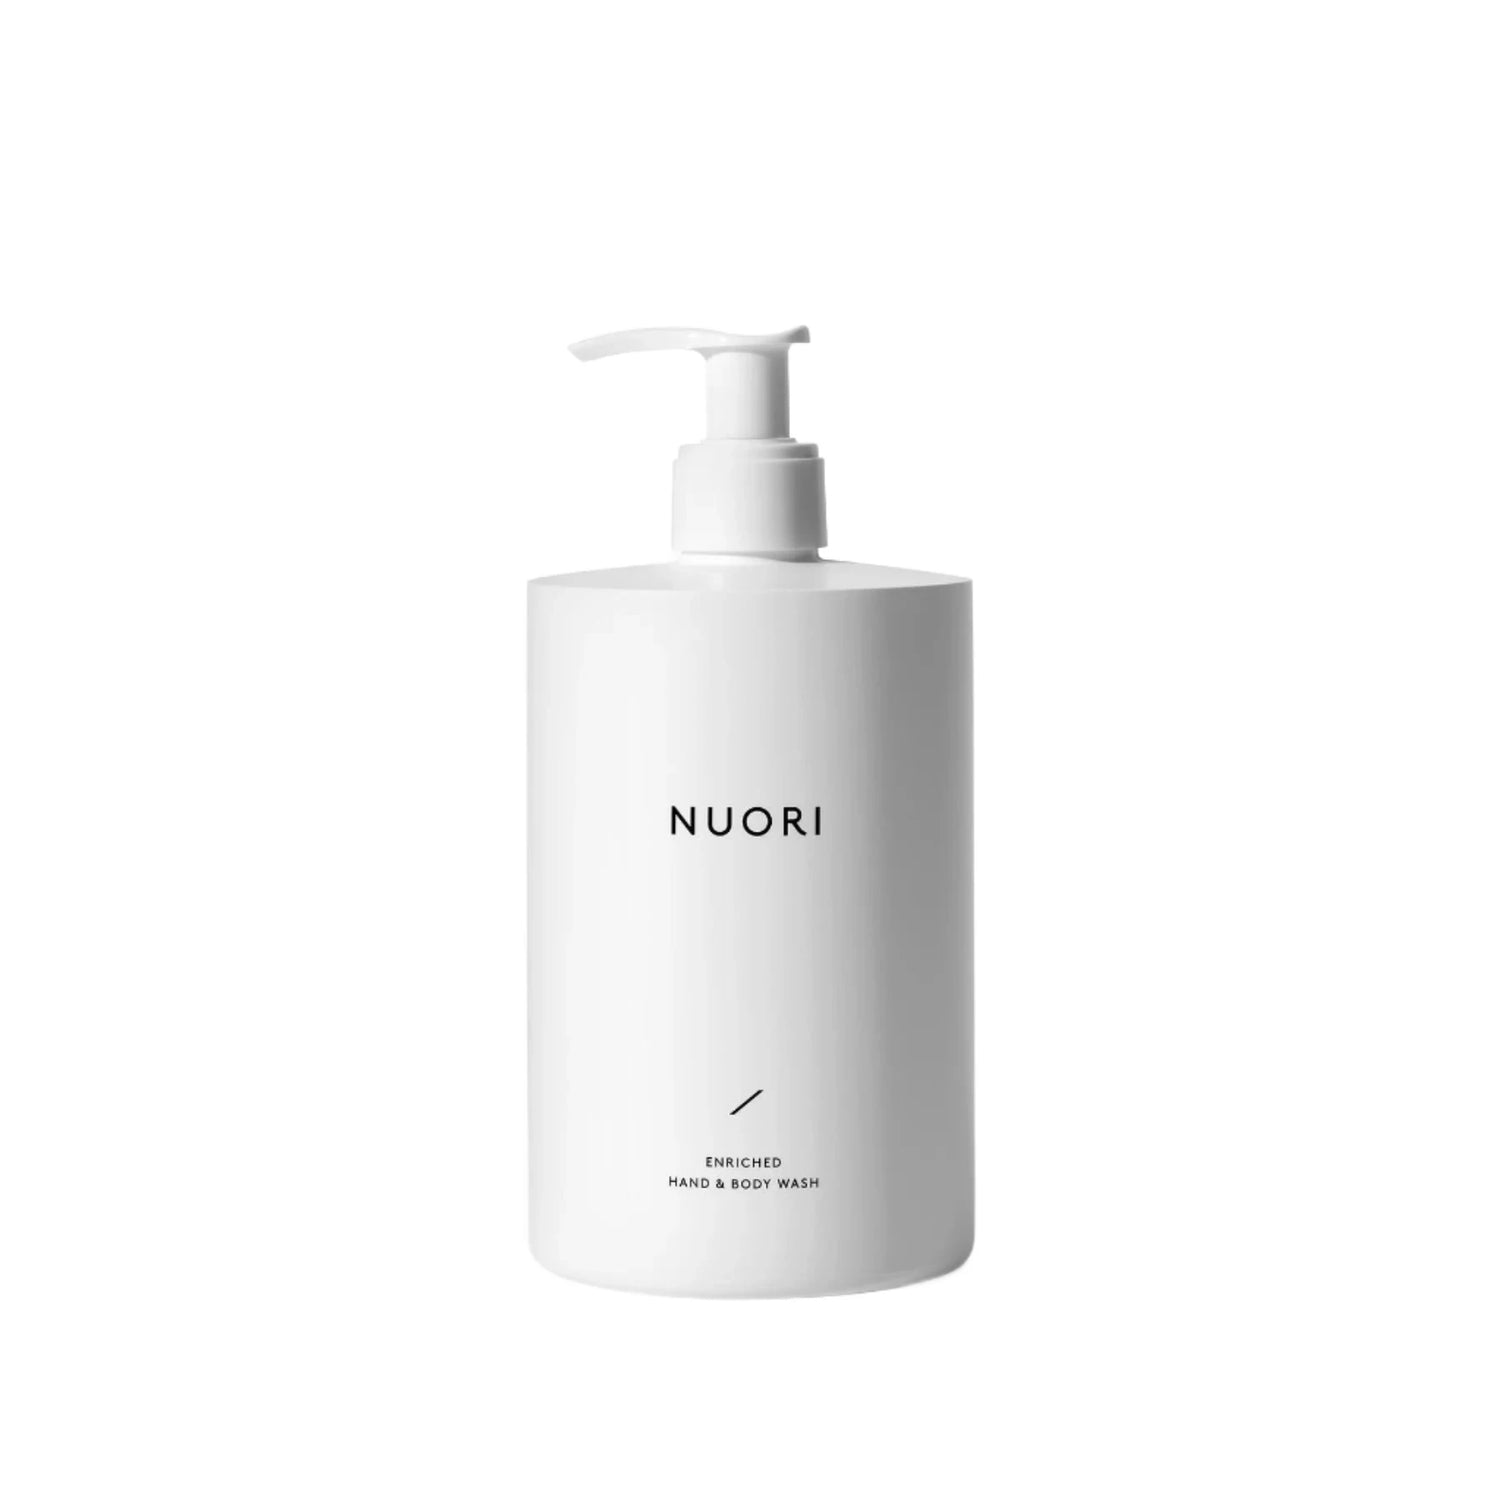 Nuori enriched hand & body wash.